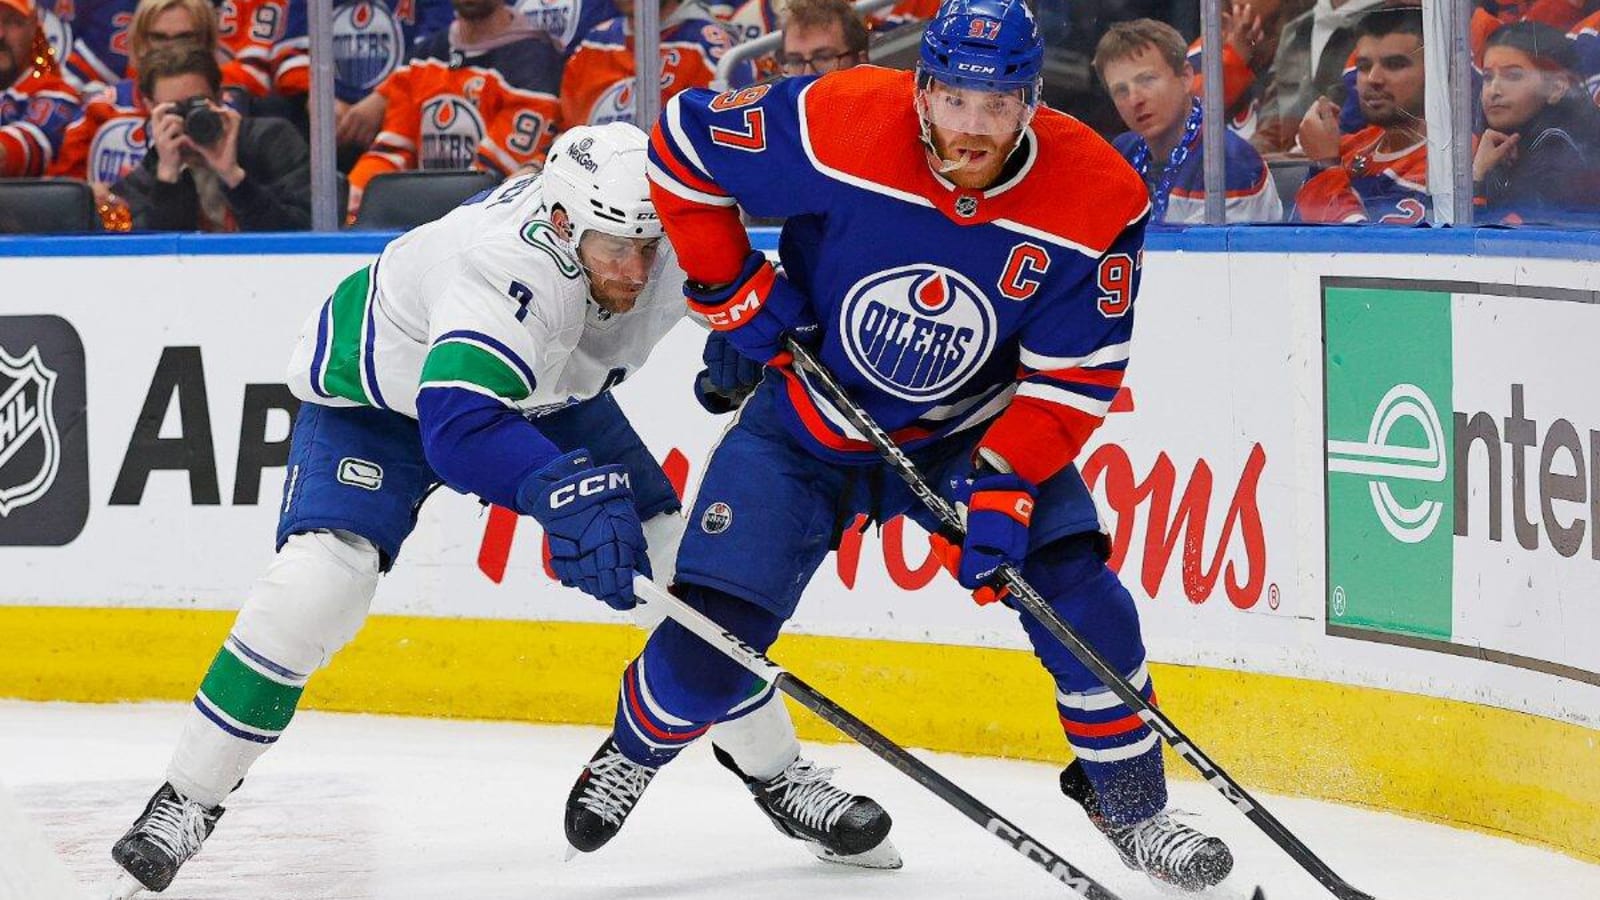 Canucks’ Carson Soucy to get hearing for McDavid cross-check; Zadorov fined $5,000